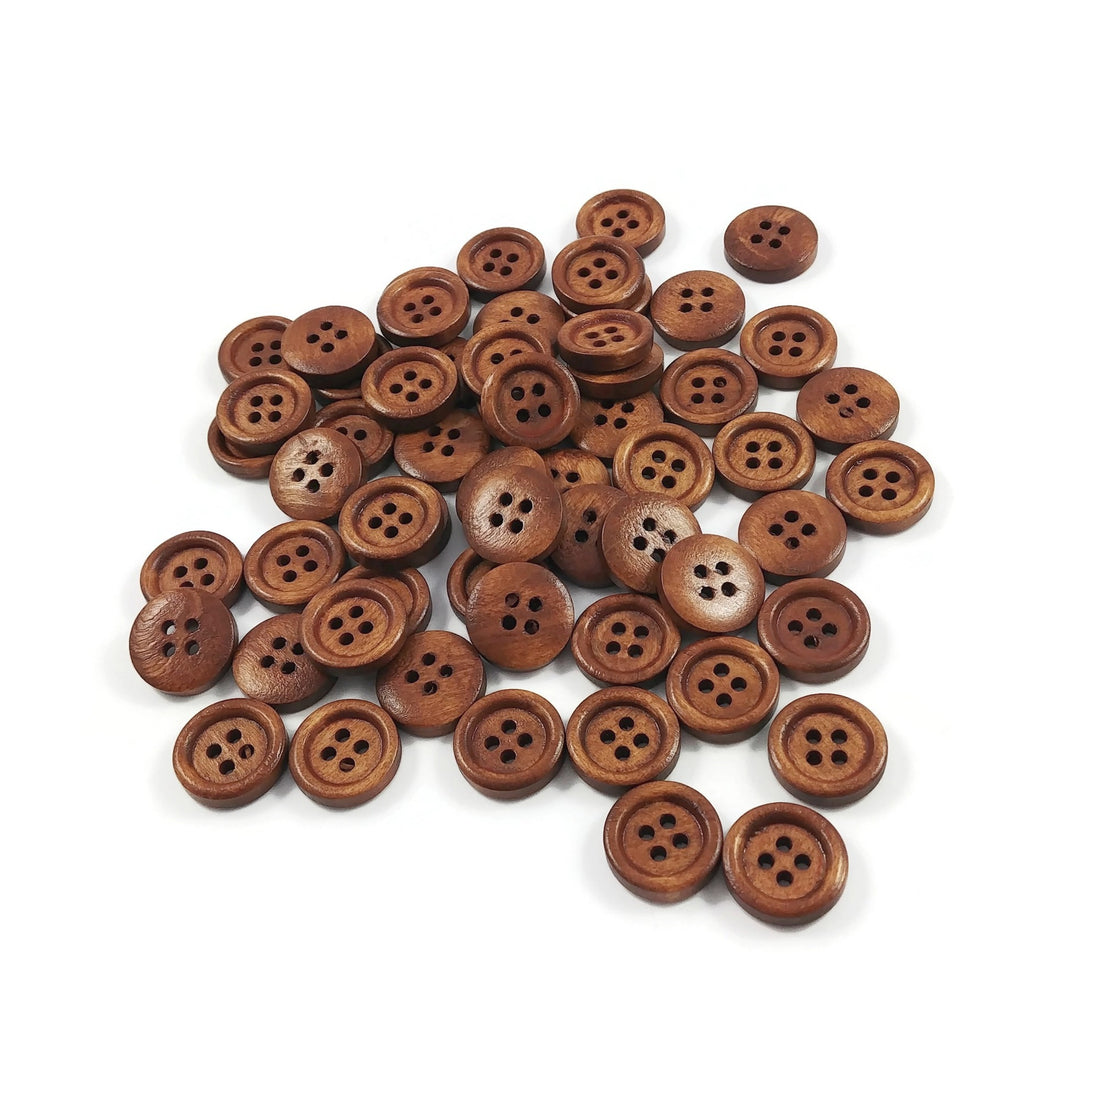 Wholesale Wooden buttons - Brown 4 Holes Wood Sewing Buttons 15mm - set of 60